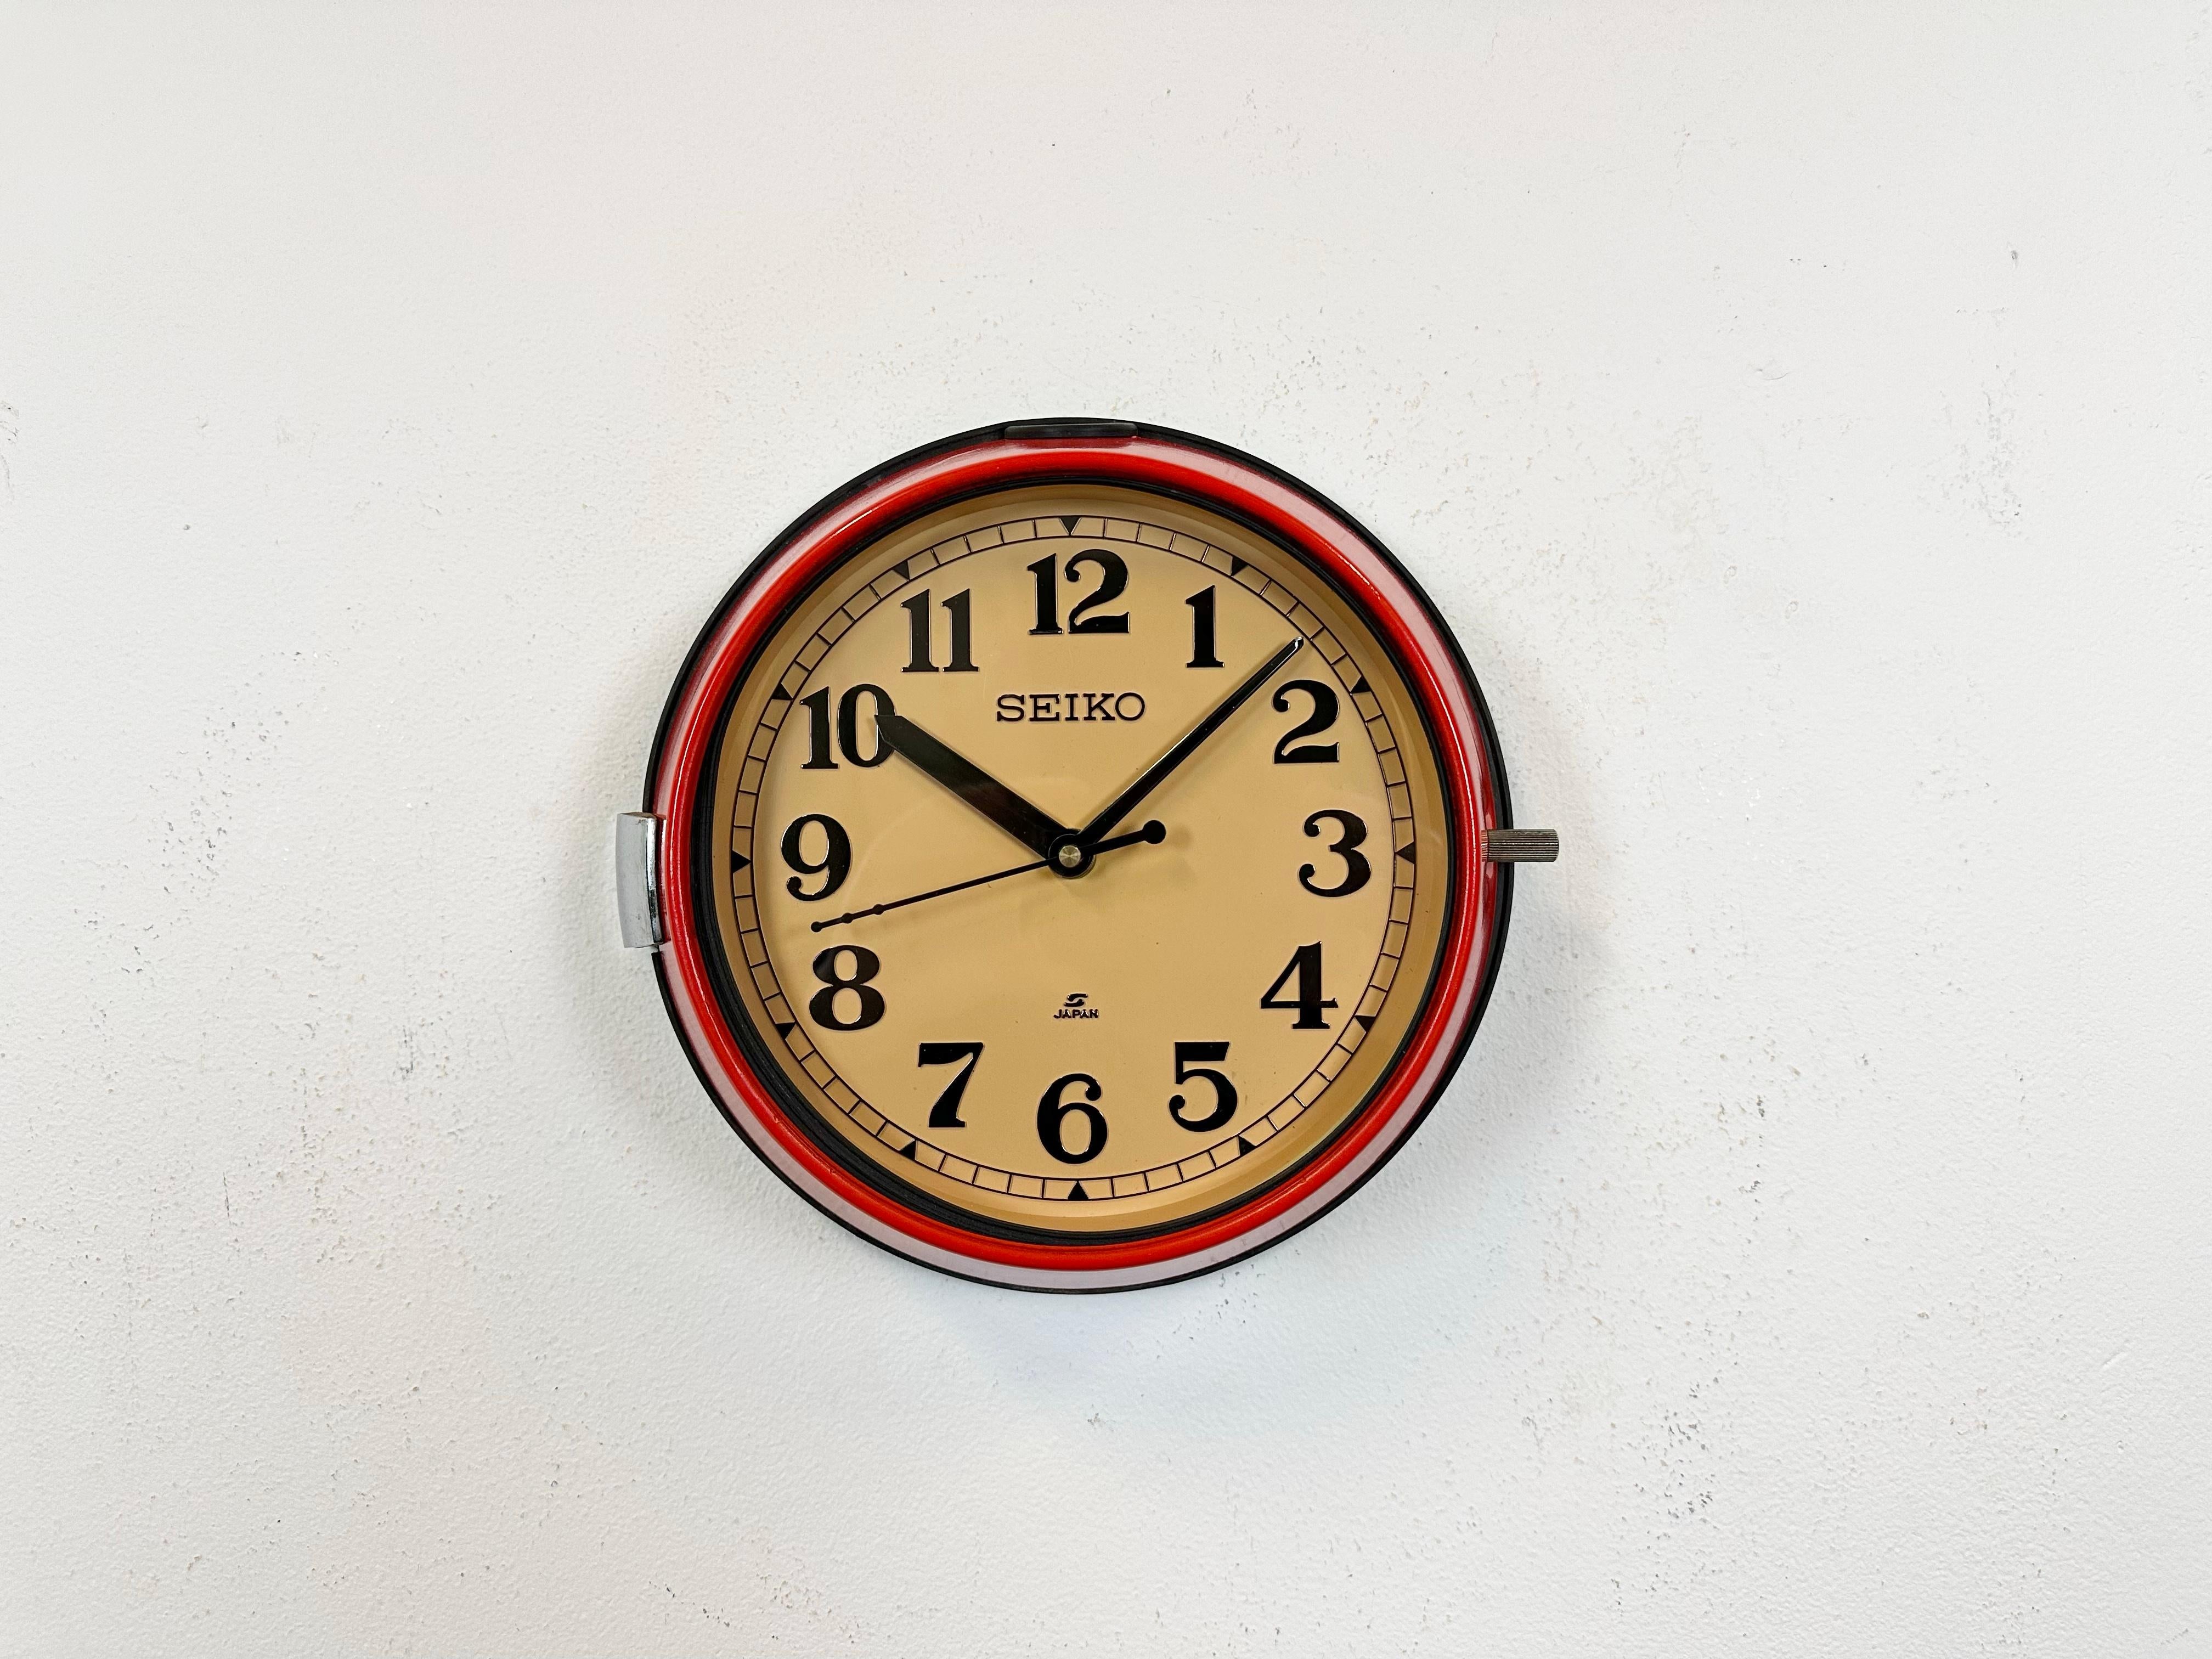 Vintage Seiko maritime slave clock designed during the 1970s and produced till 1990s. These clocks were used on large Japanese tankers and cargo ships. It features a red metal frame, a plastic dial and a clear glass cover. This item has been